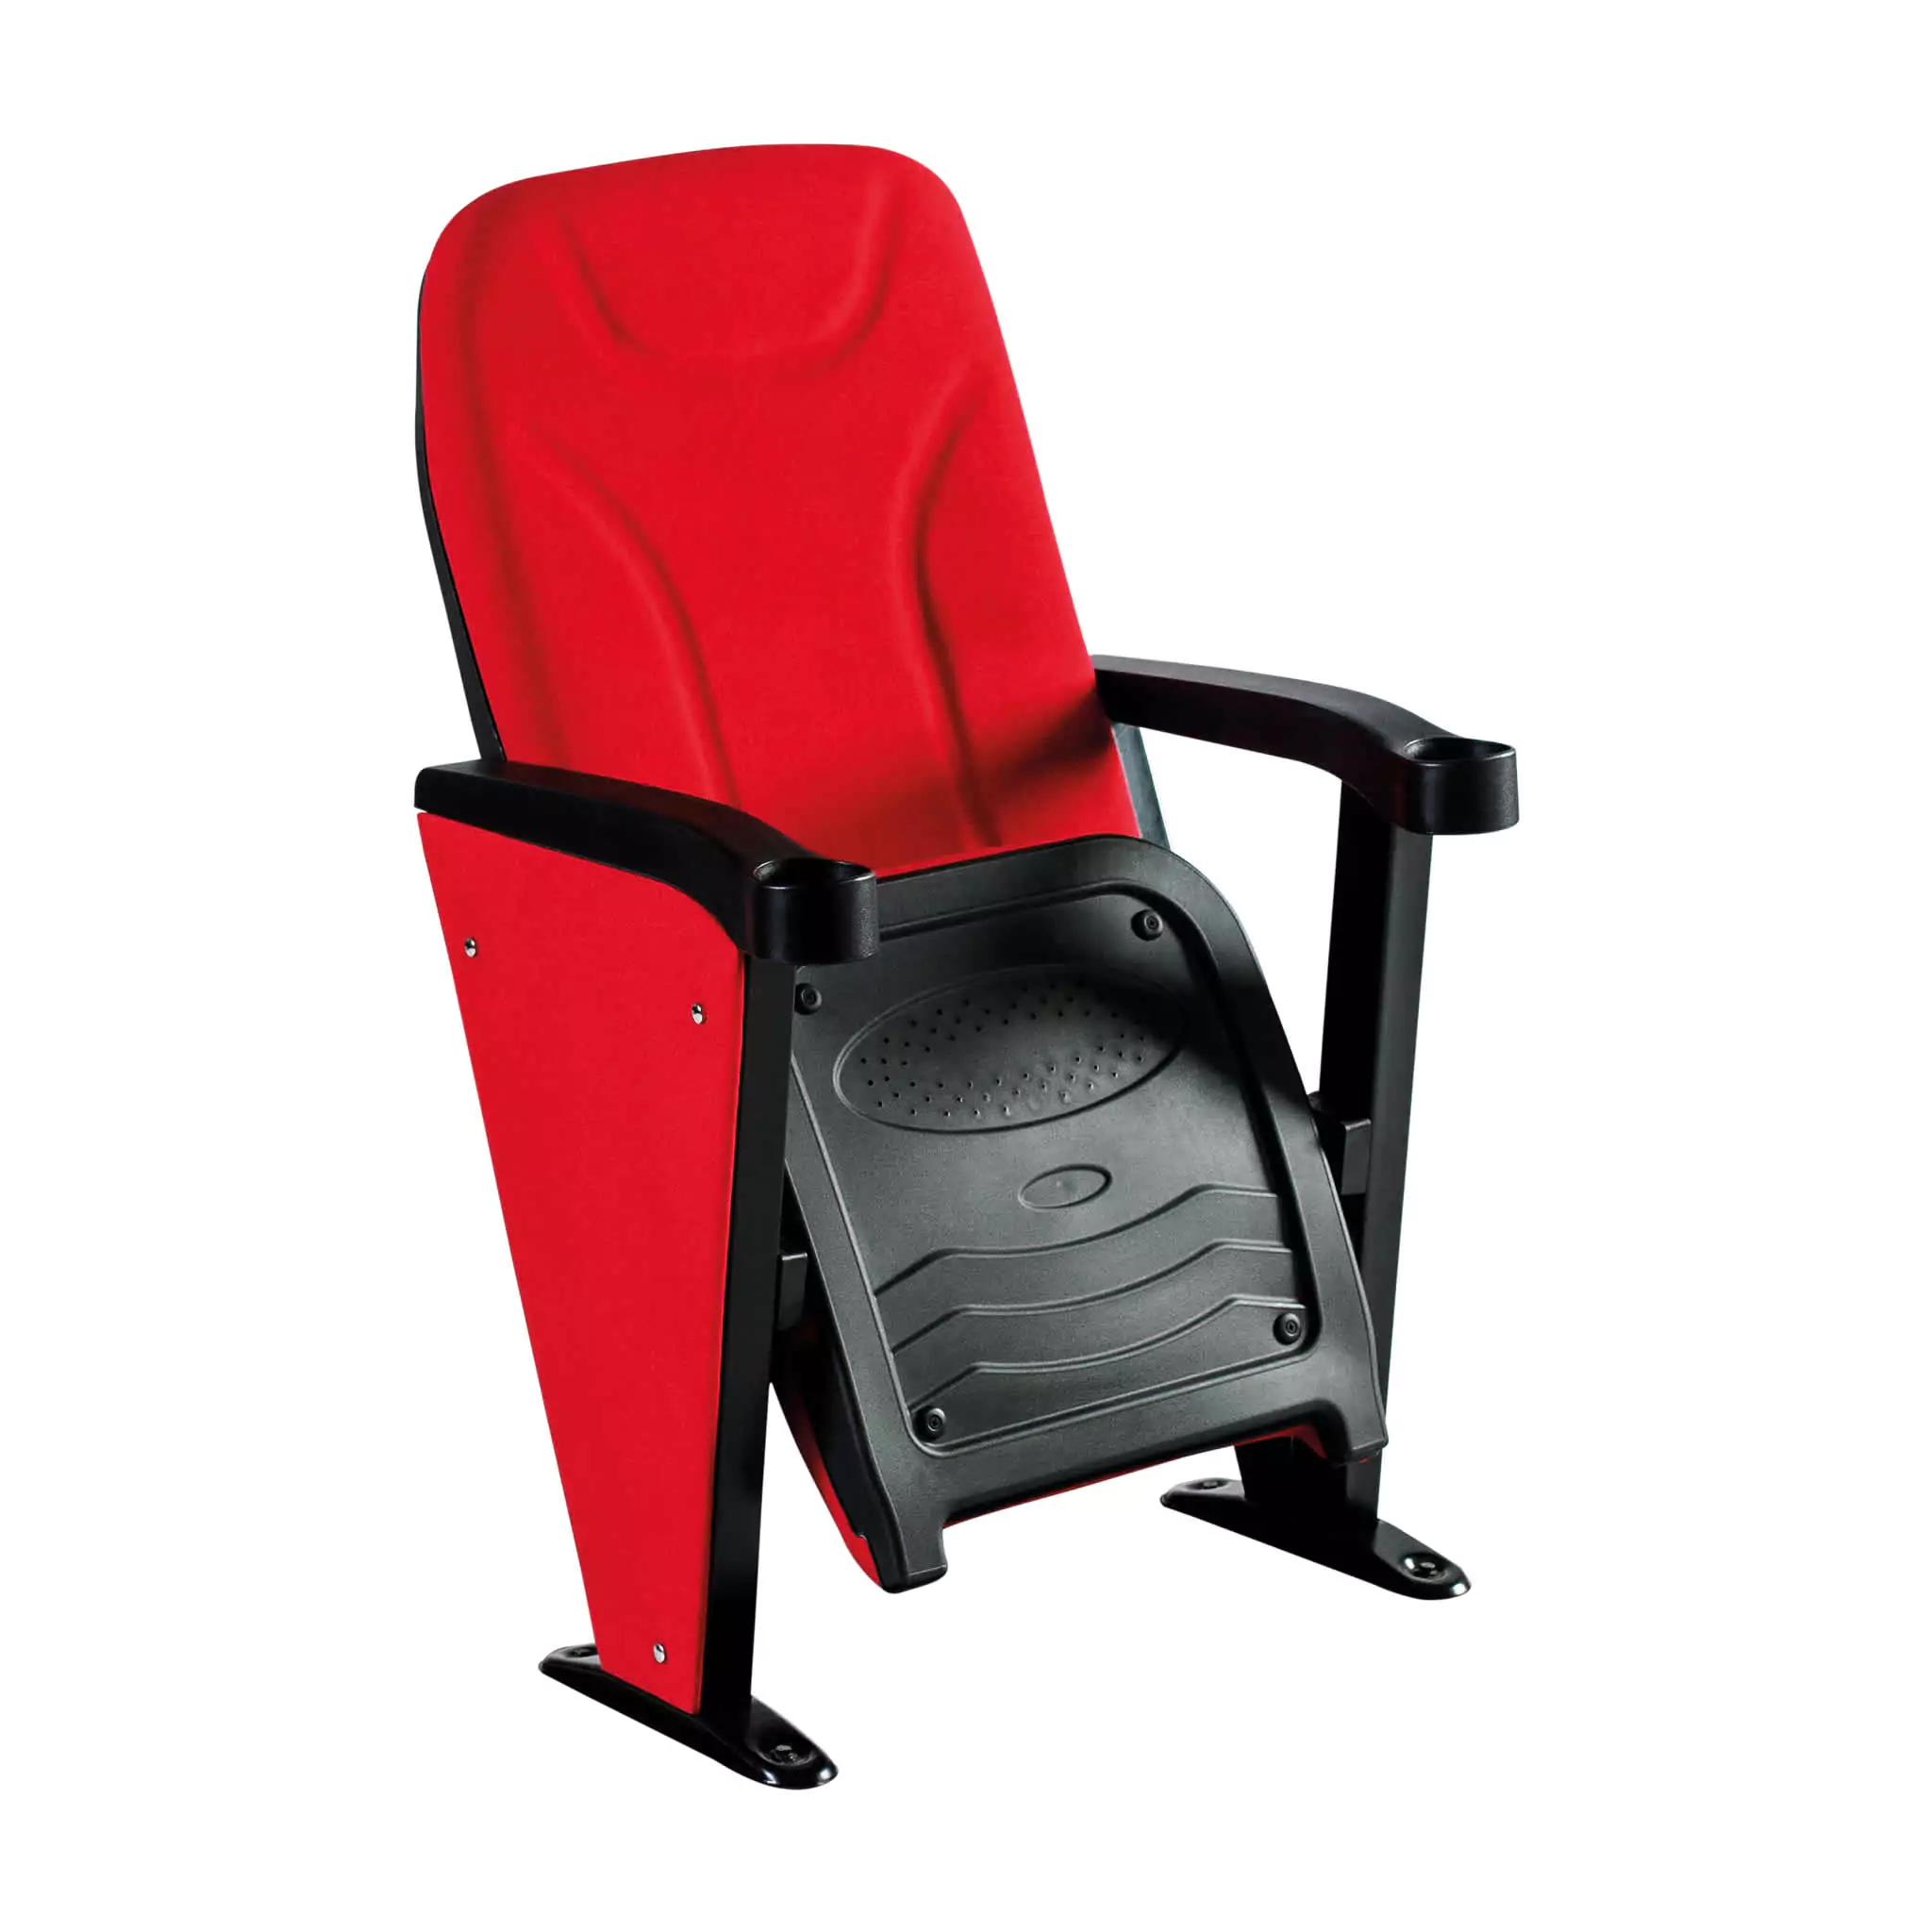 Simko Seating Product Conference Seat Zirkon 01